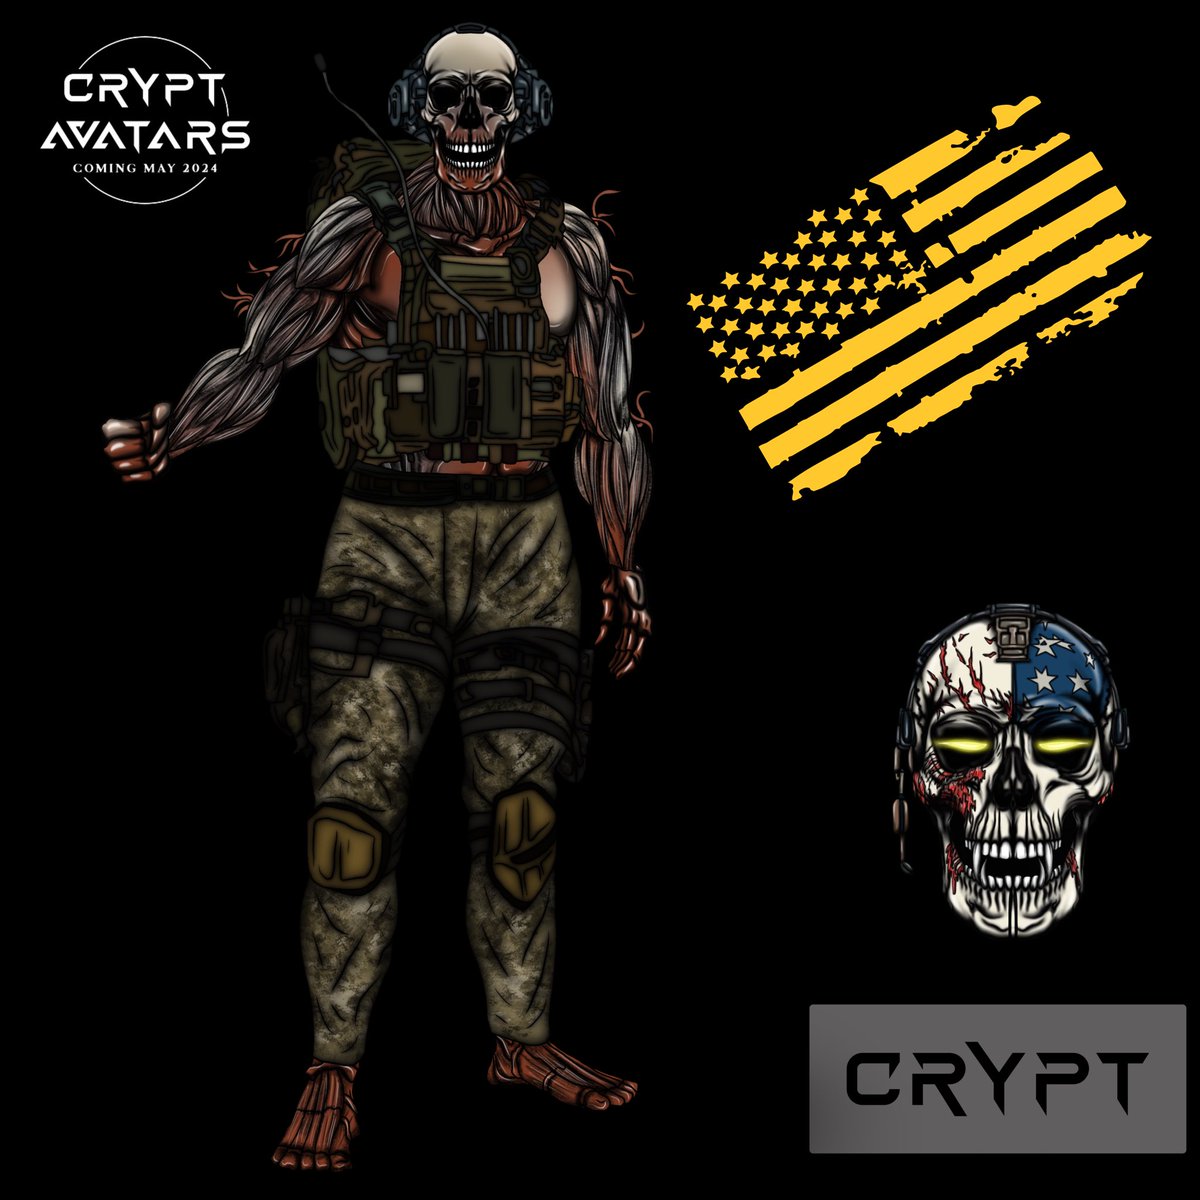 Had to drop a Sneak Peek for @crypt_warriors this is the first trait drop 🇺🇸 #Veteran #America #VeteransLivesMatter #NFT #Web3